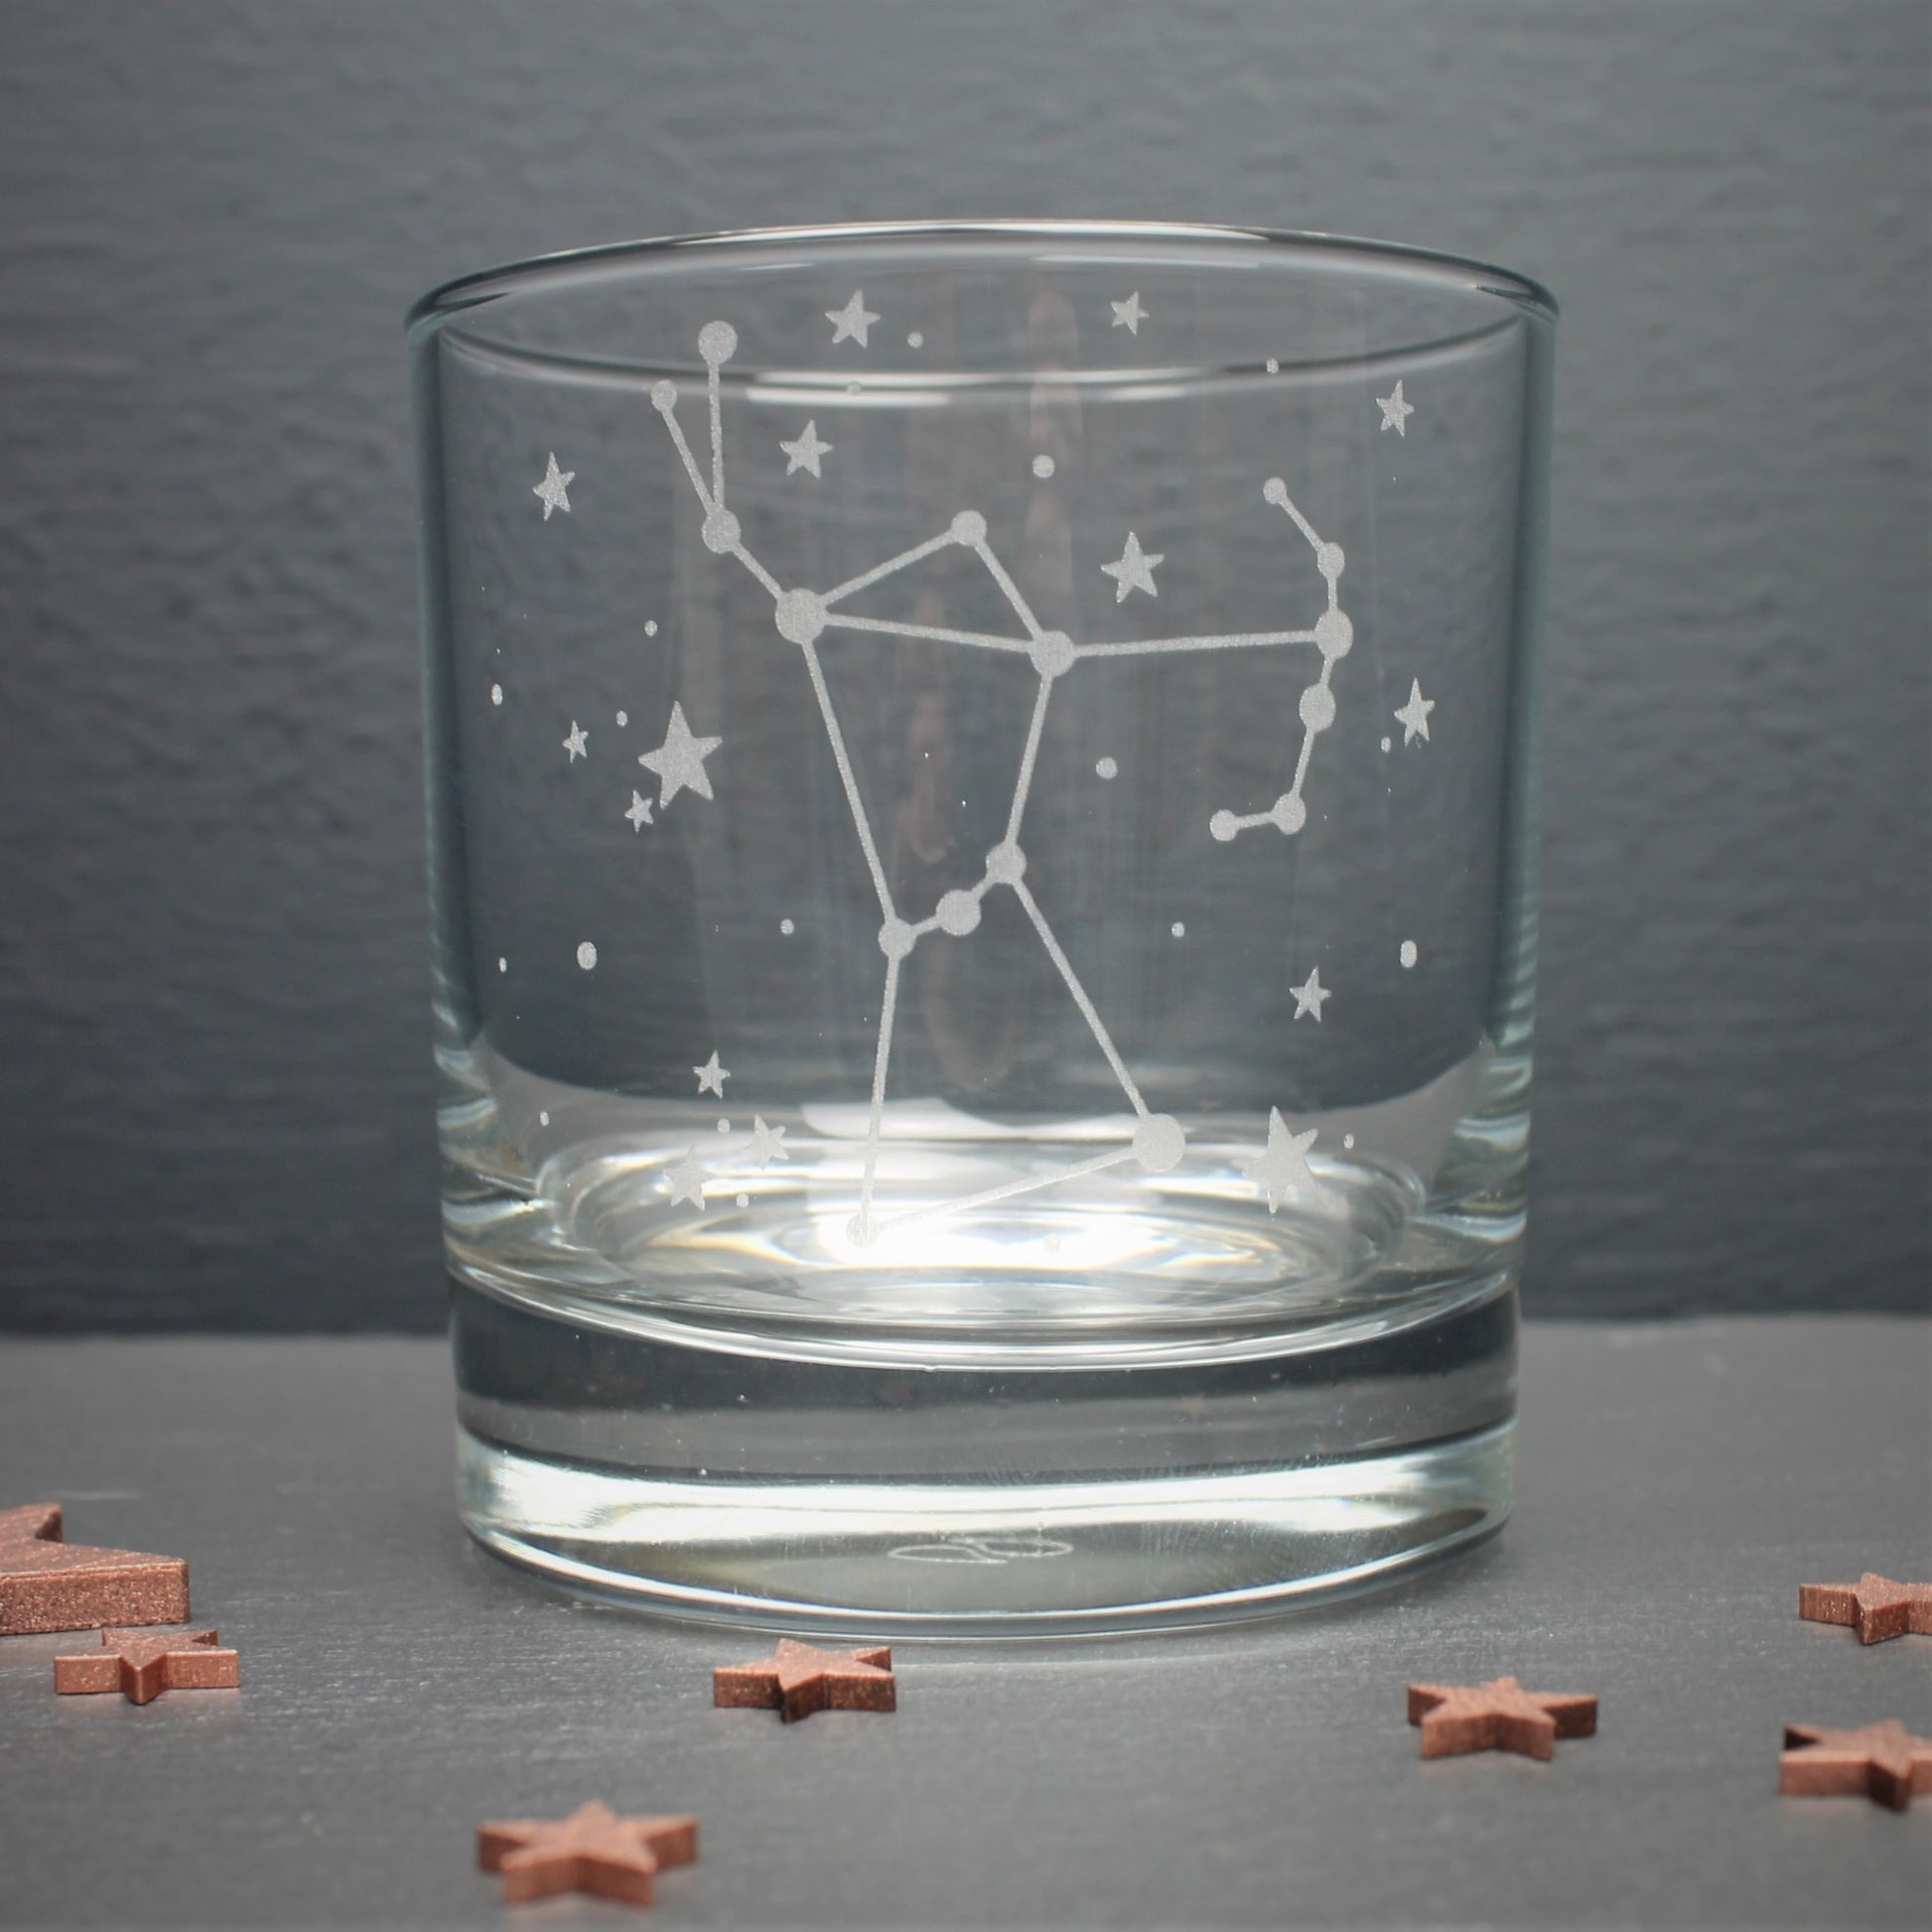 Glass tumbler engraved with the Orion constellation and star design